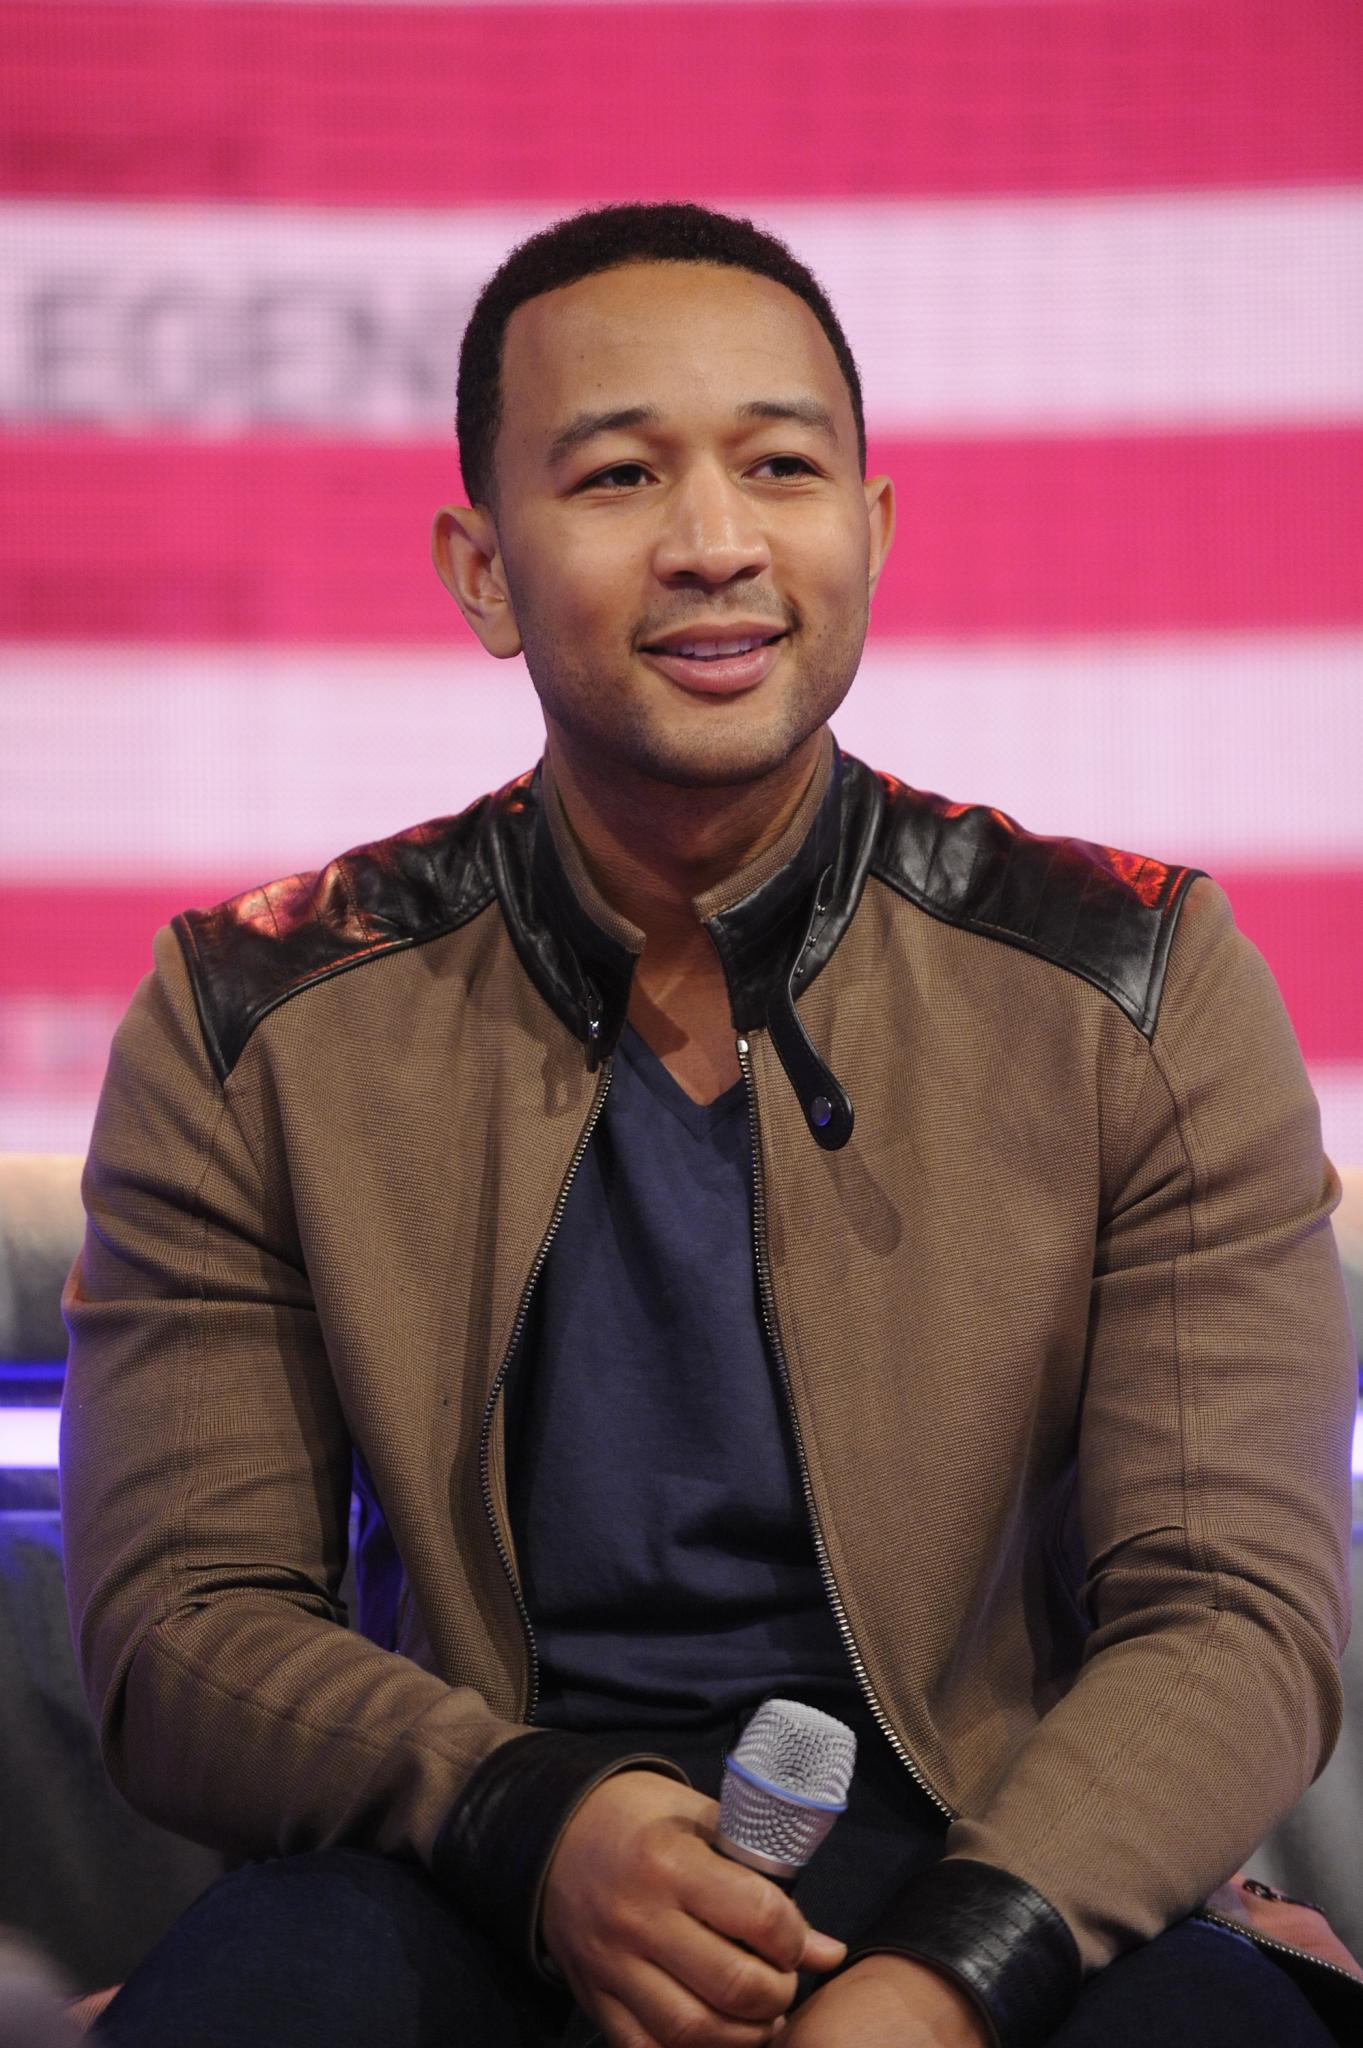 7 Things You Didn't Know About John Legend